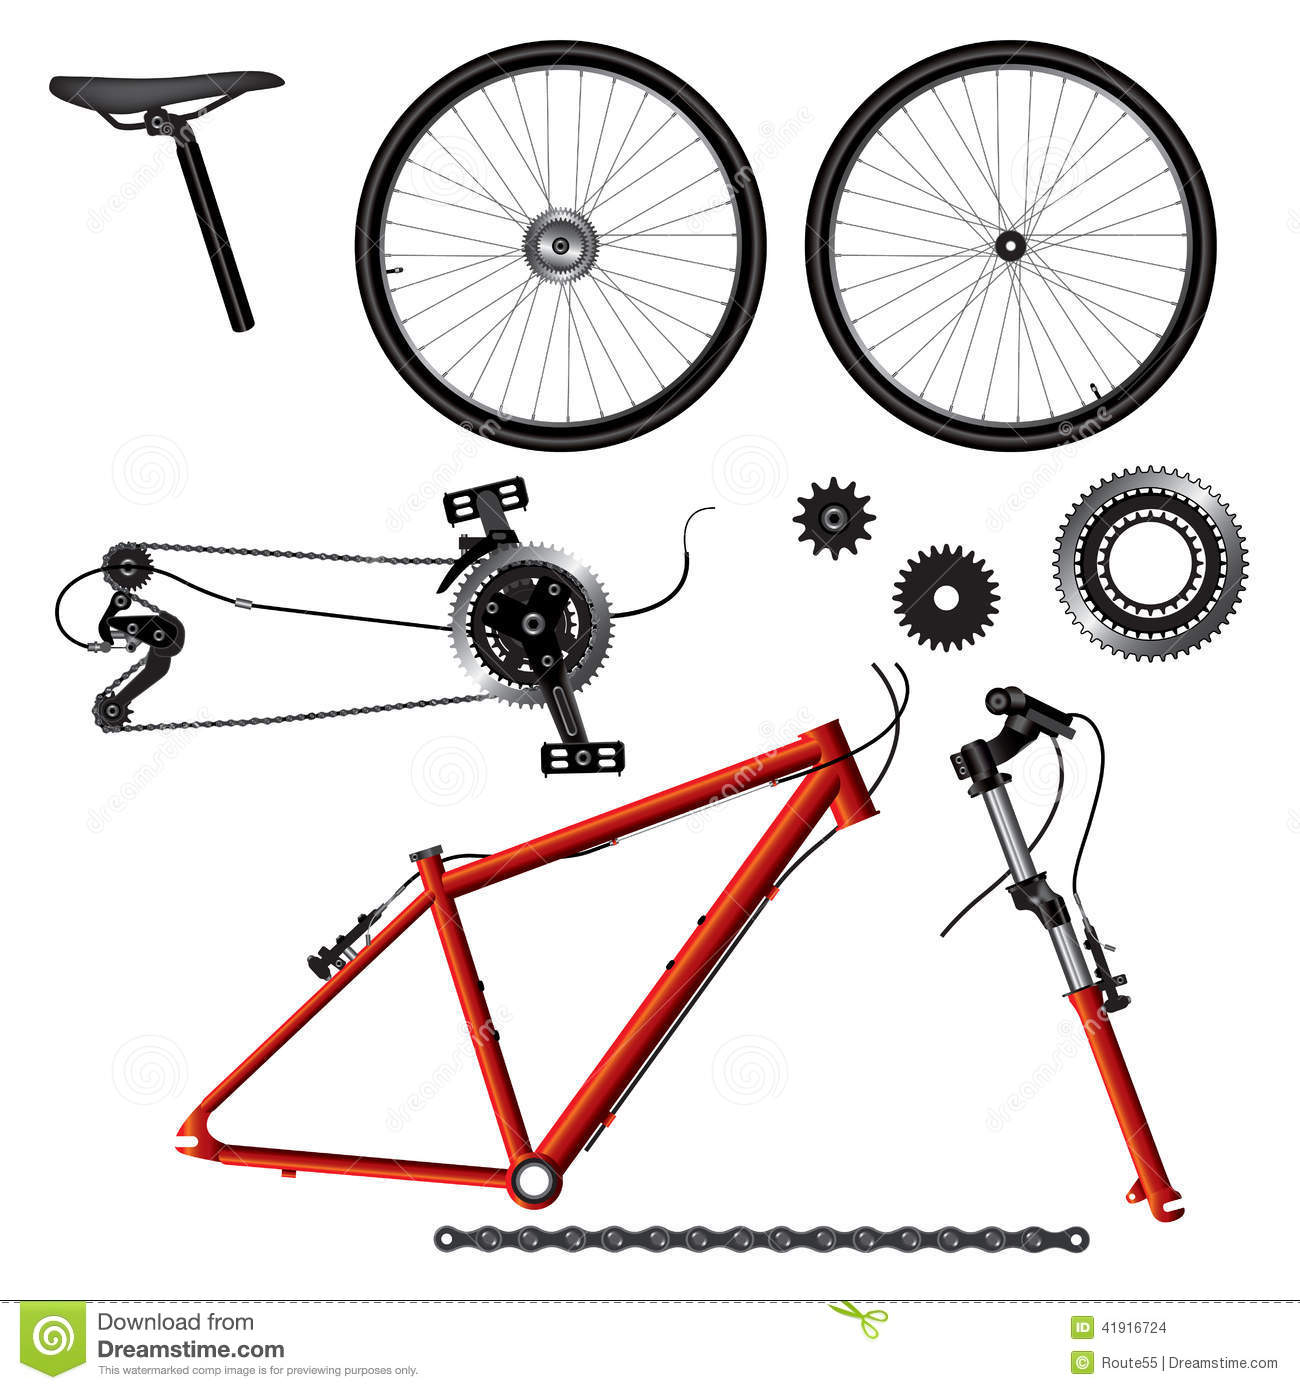 Bicycle Parts Illustration